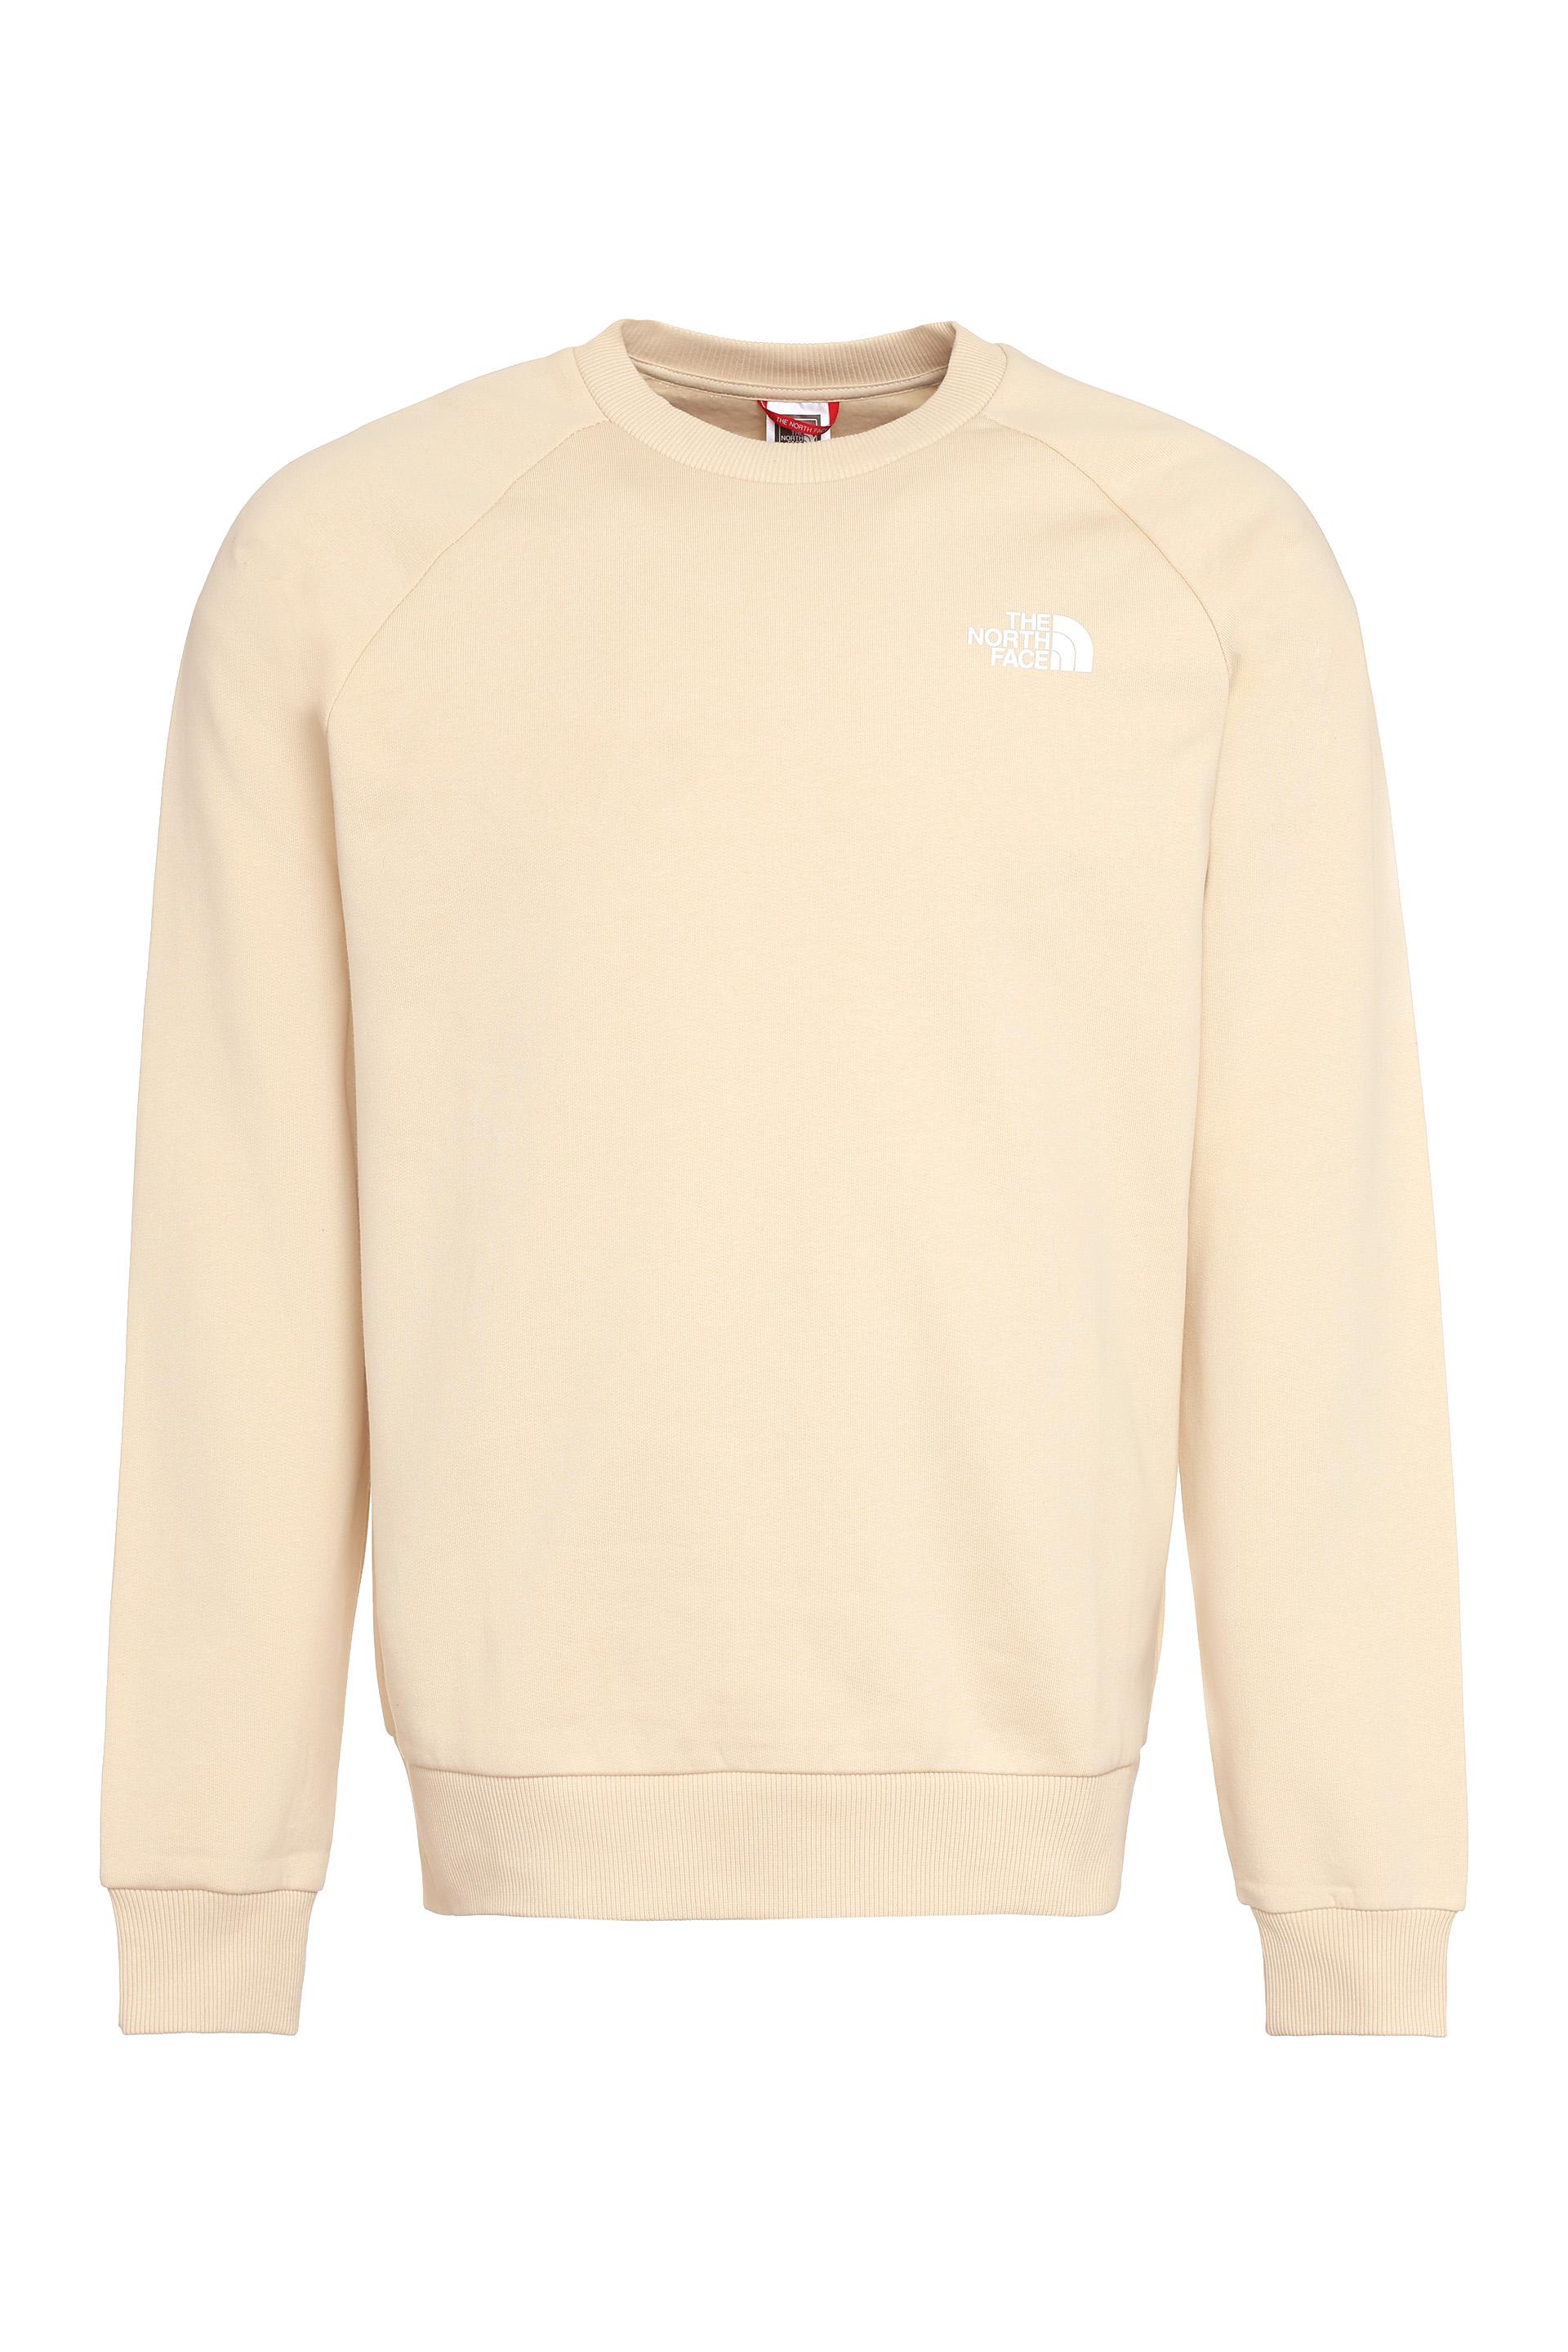 The North Face Cotton Crew-neck Sweatshirt in Beige (Natural) for Men ...